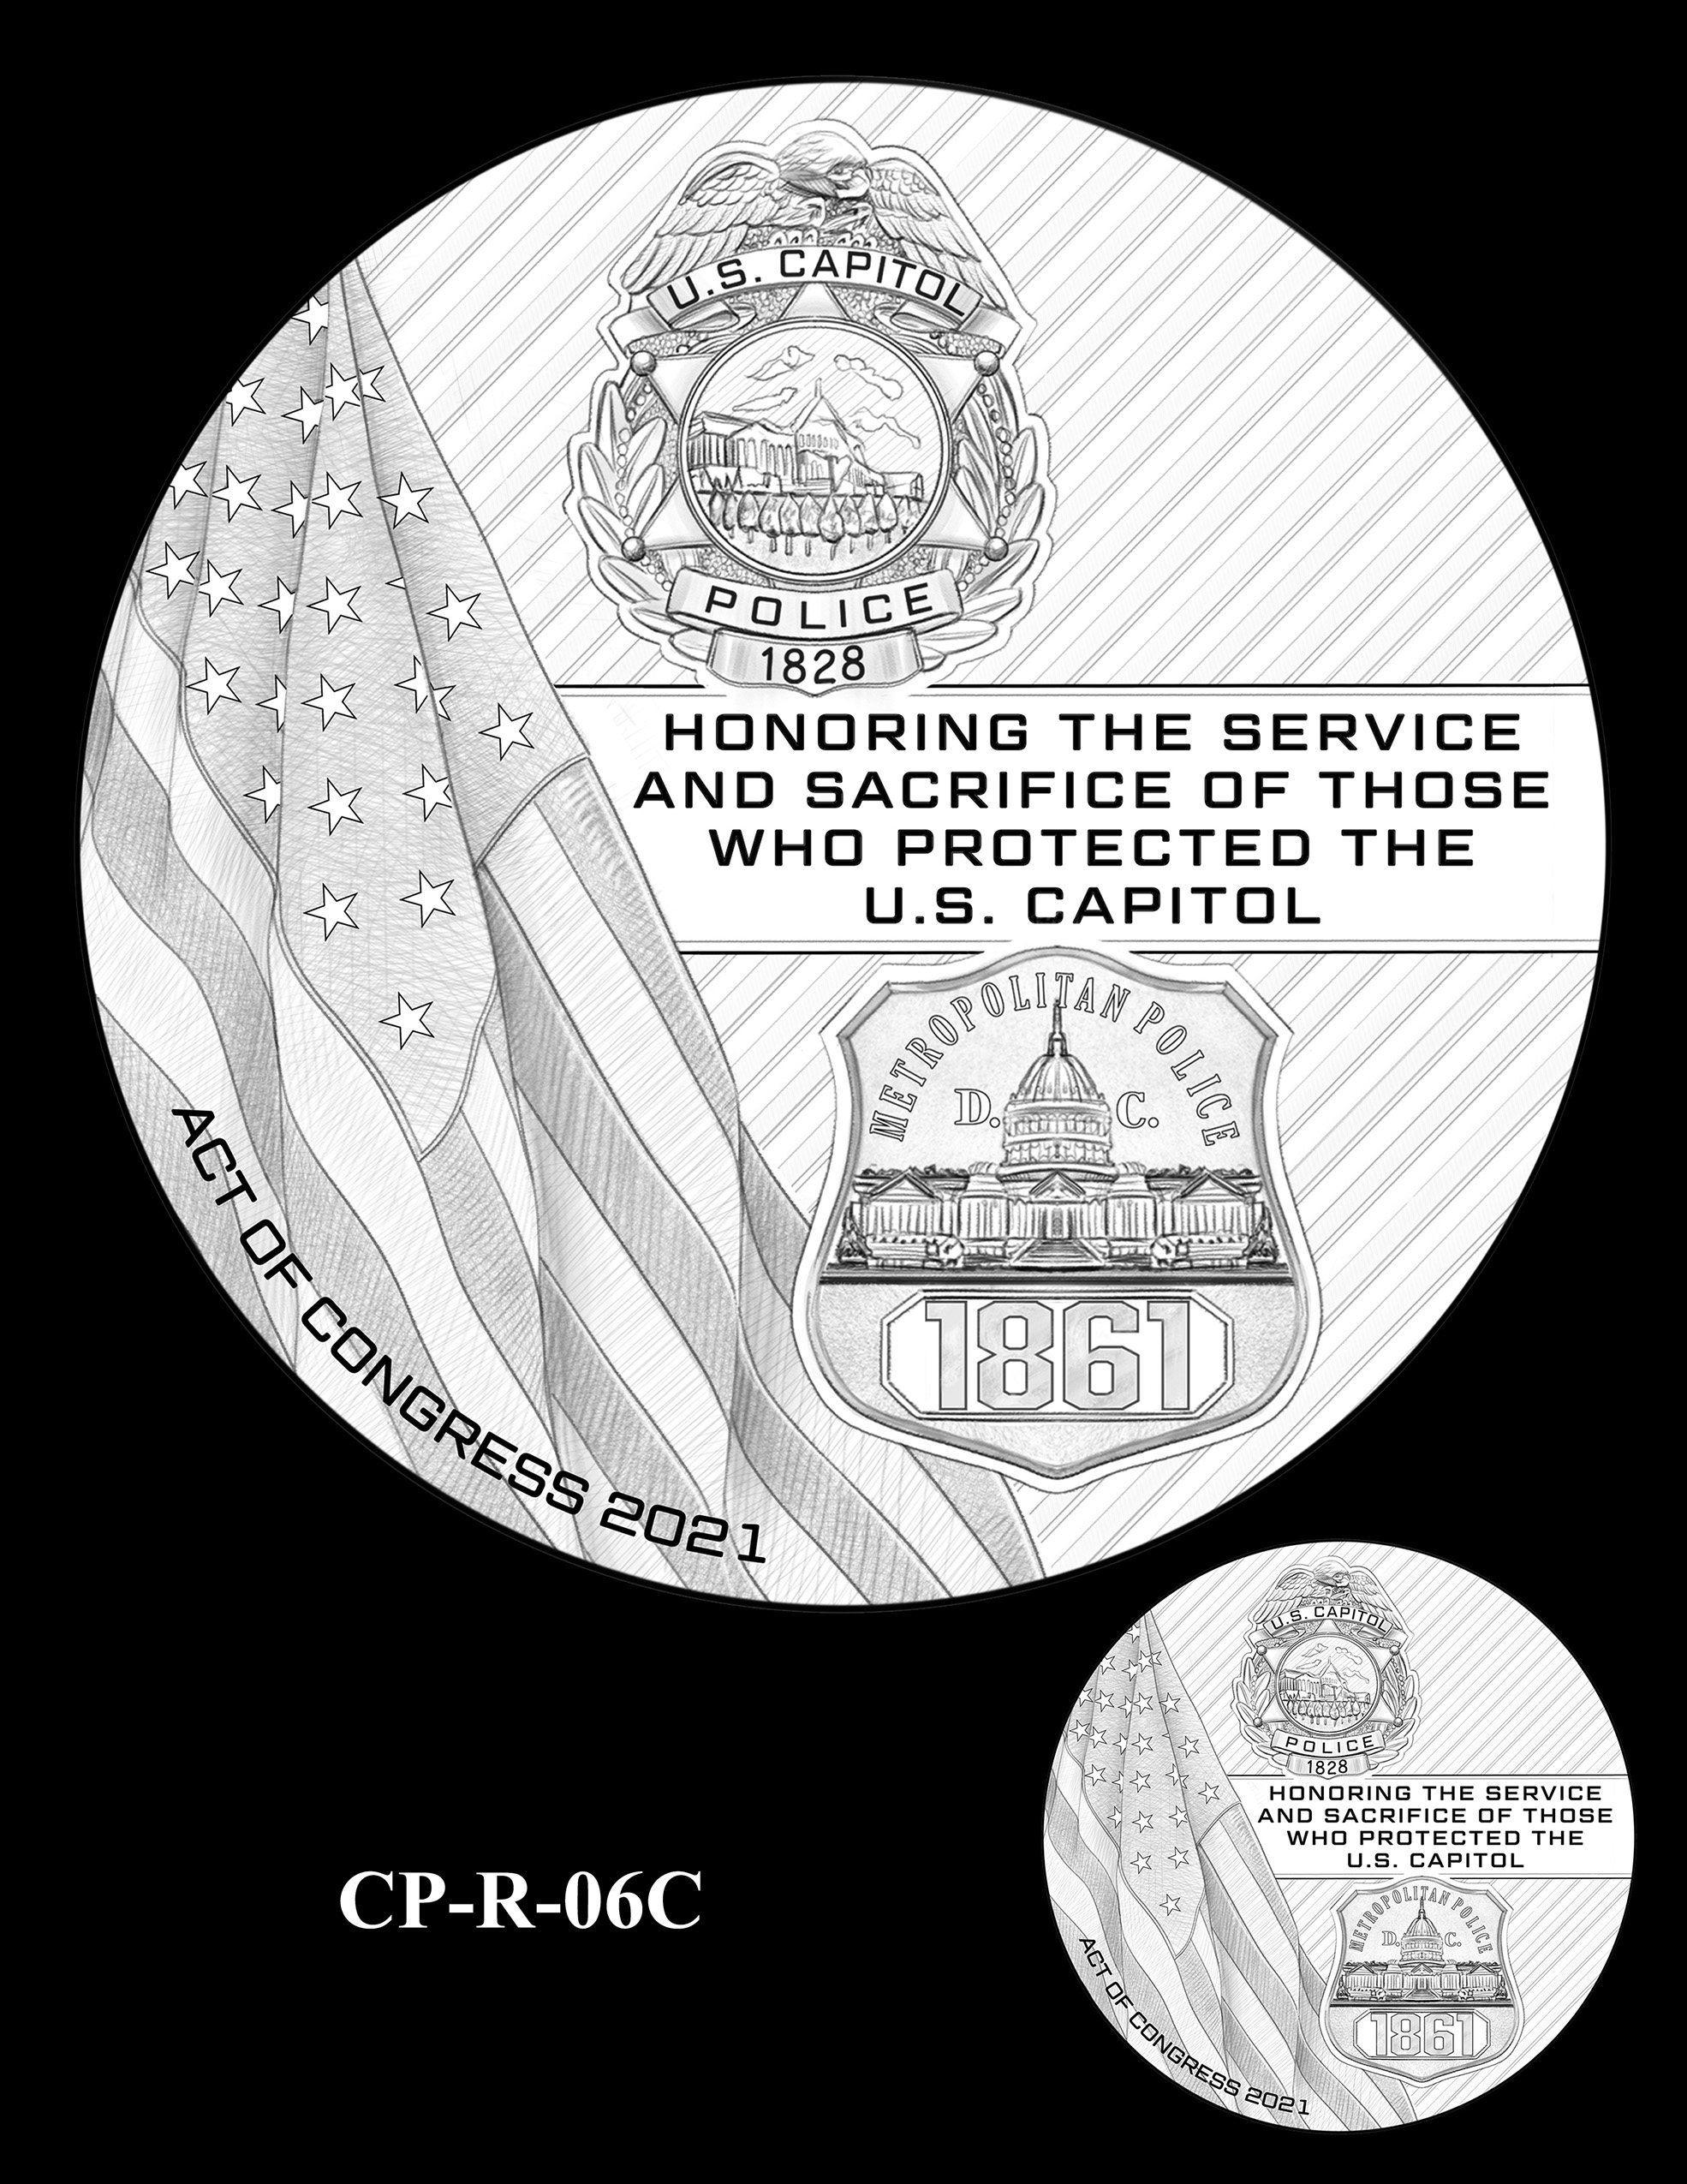 CP-R-06C -- Congressional Gold Medal for Those Who Protected the U.S. Capitol on January 6th 2021